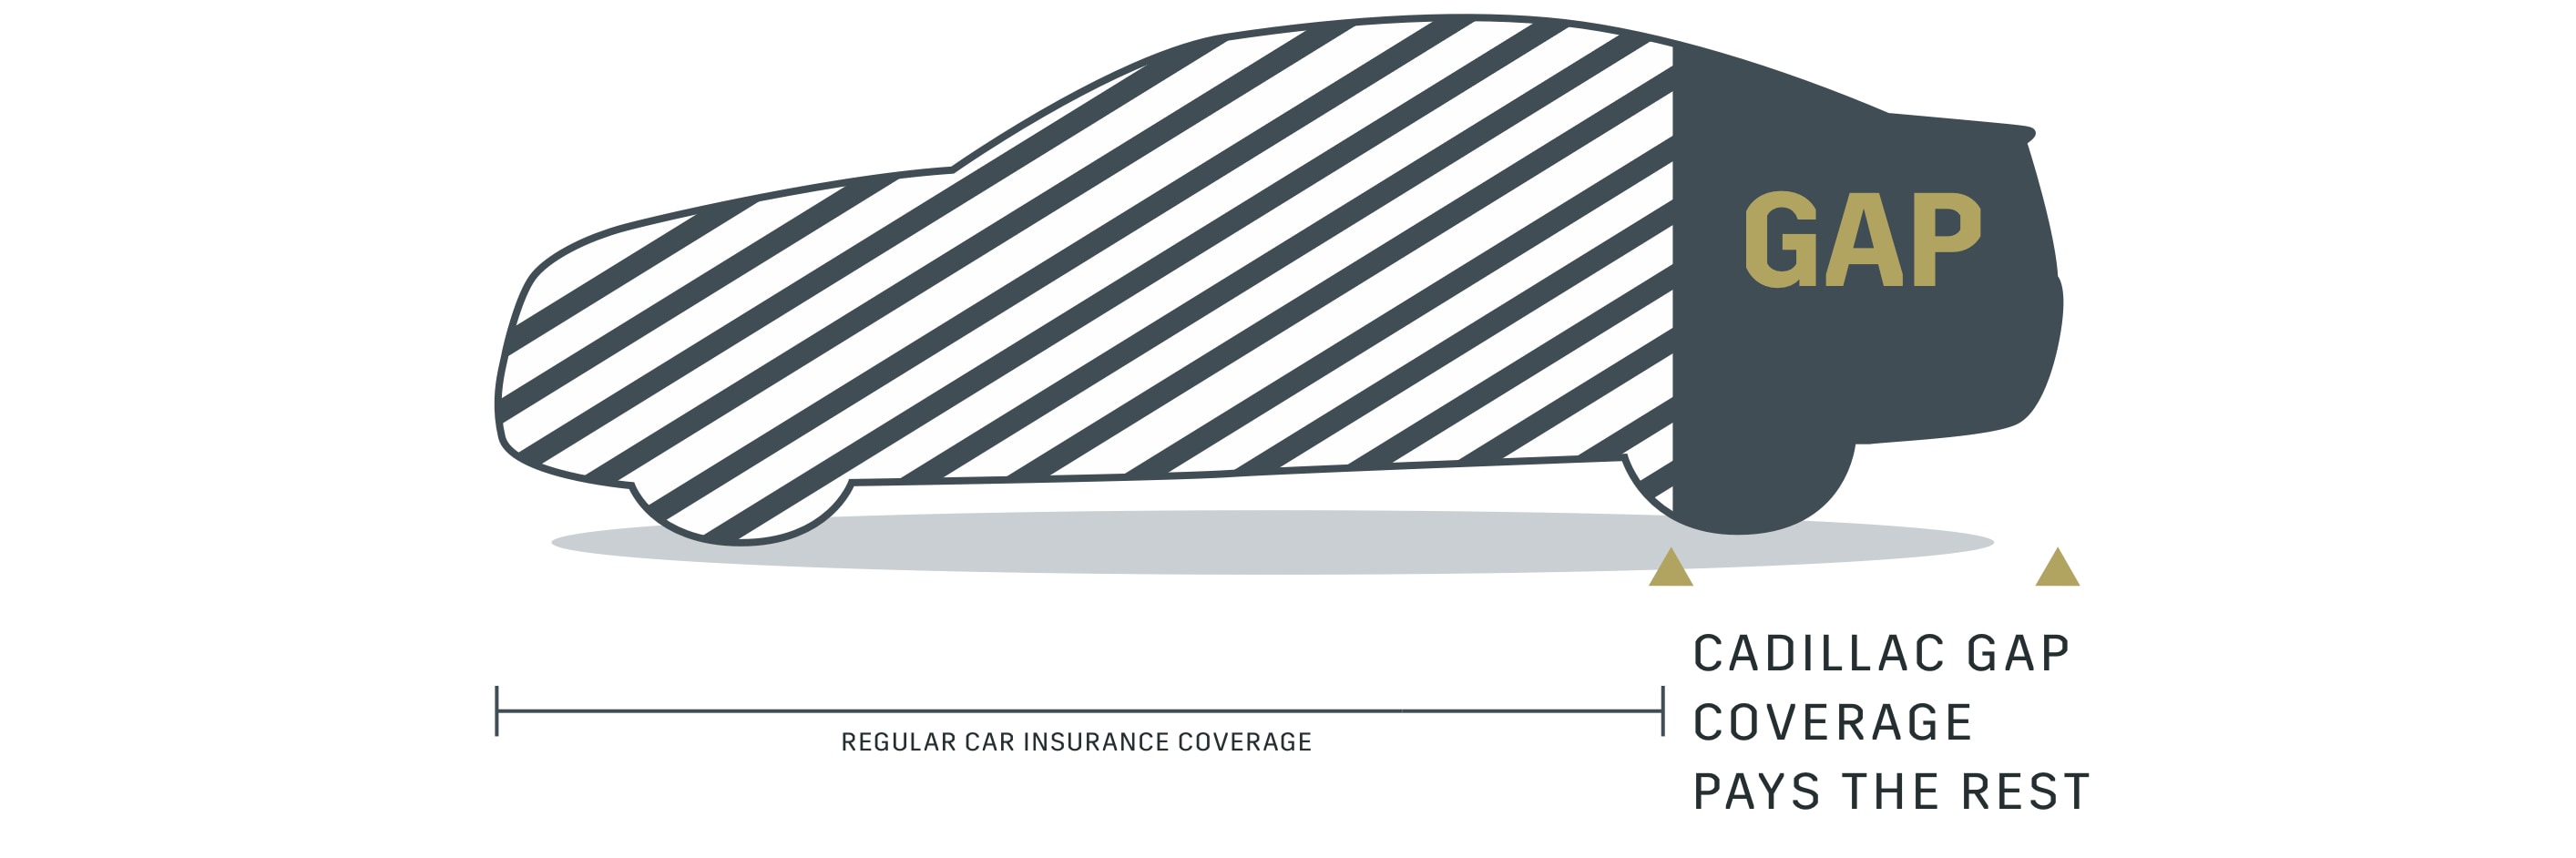 Cadillac Guaranteed Asset Protection (GAP) Coverage Infographic